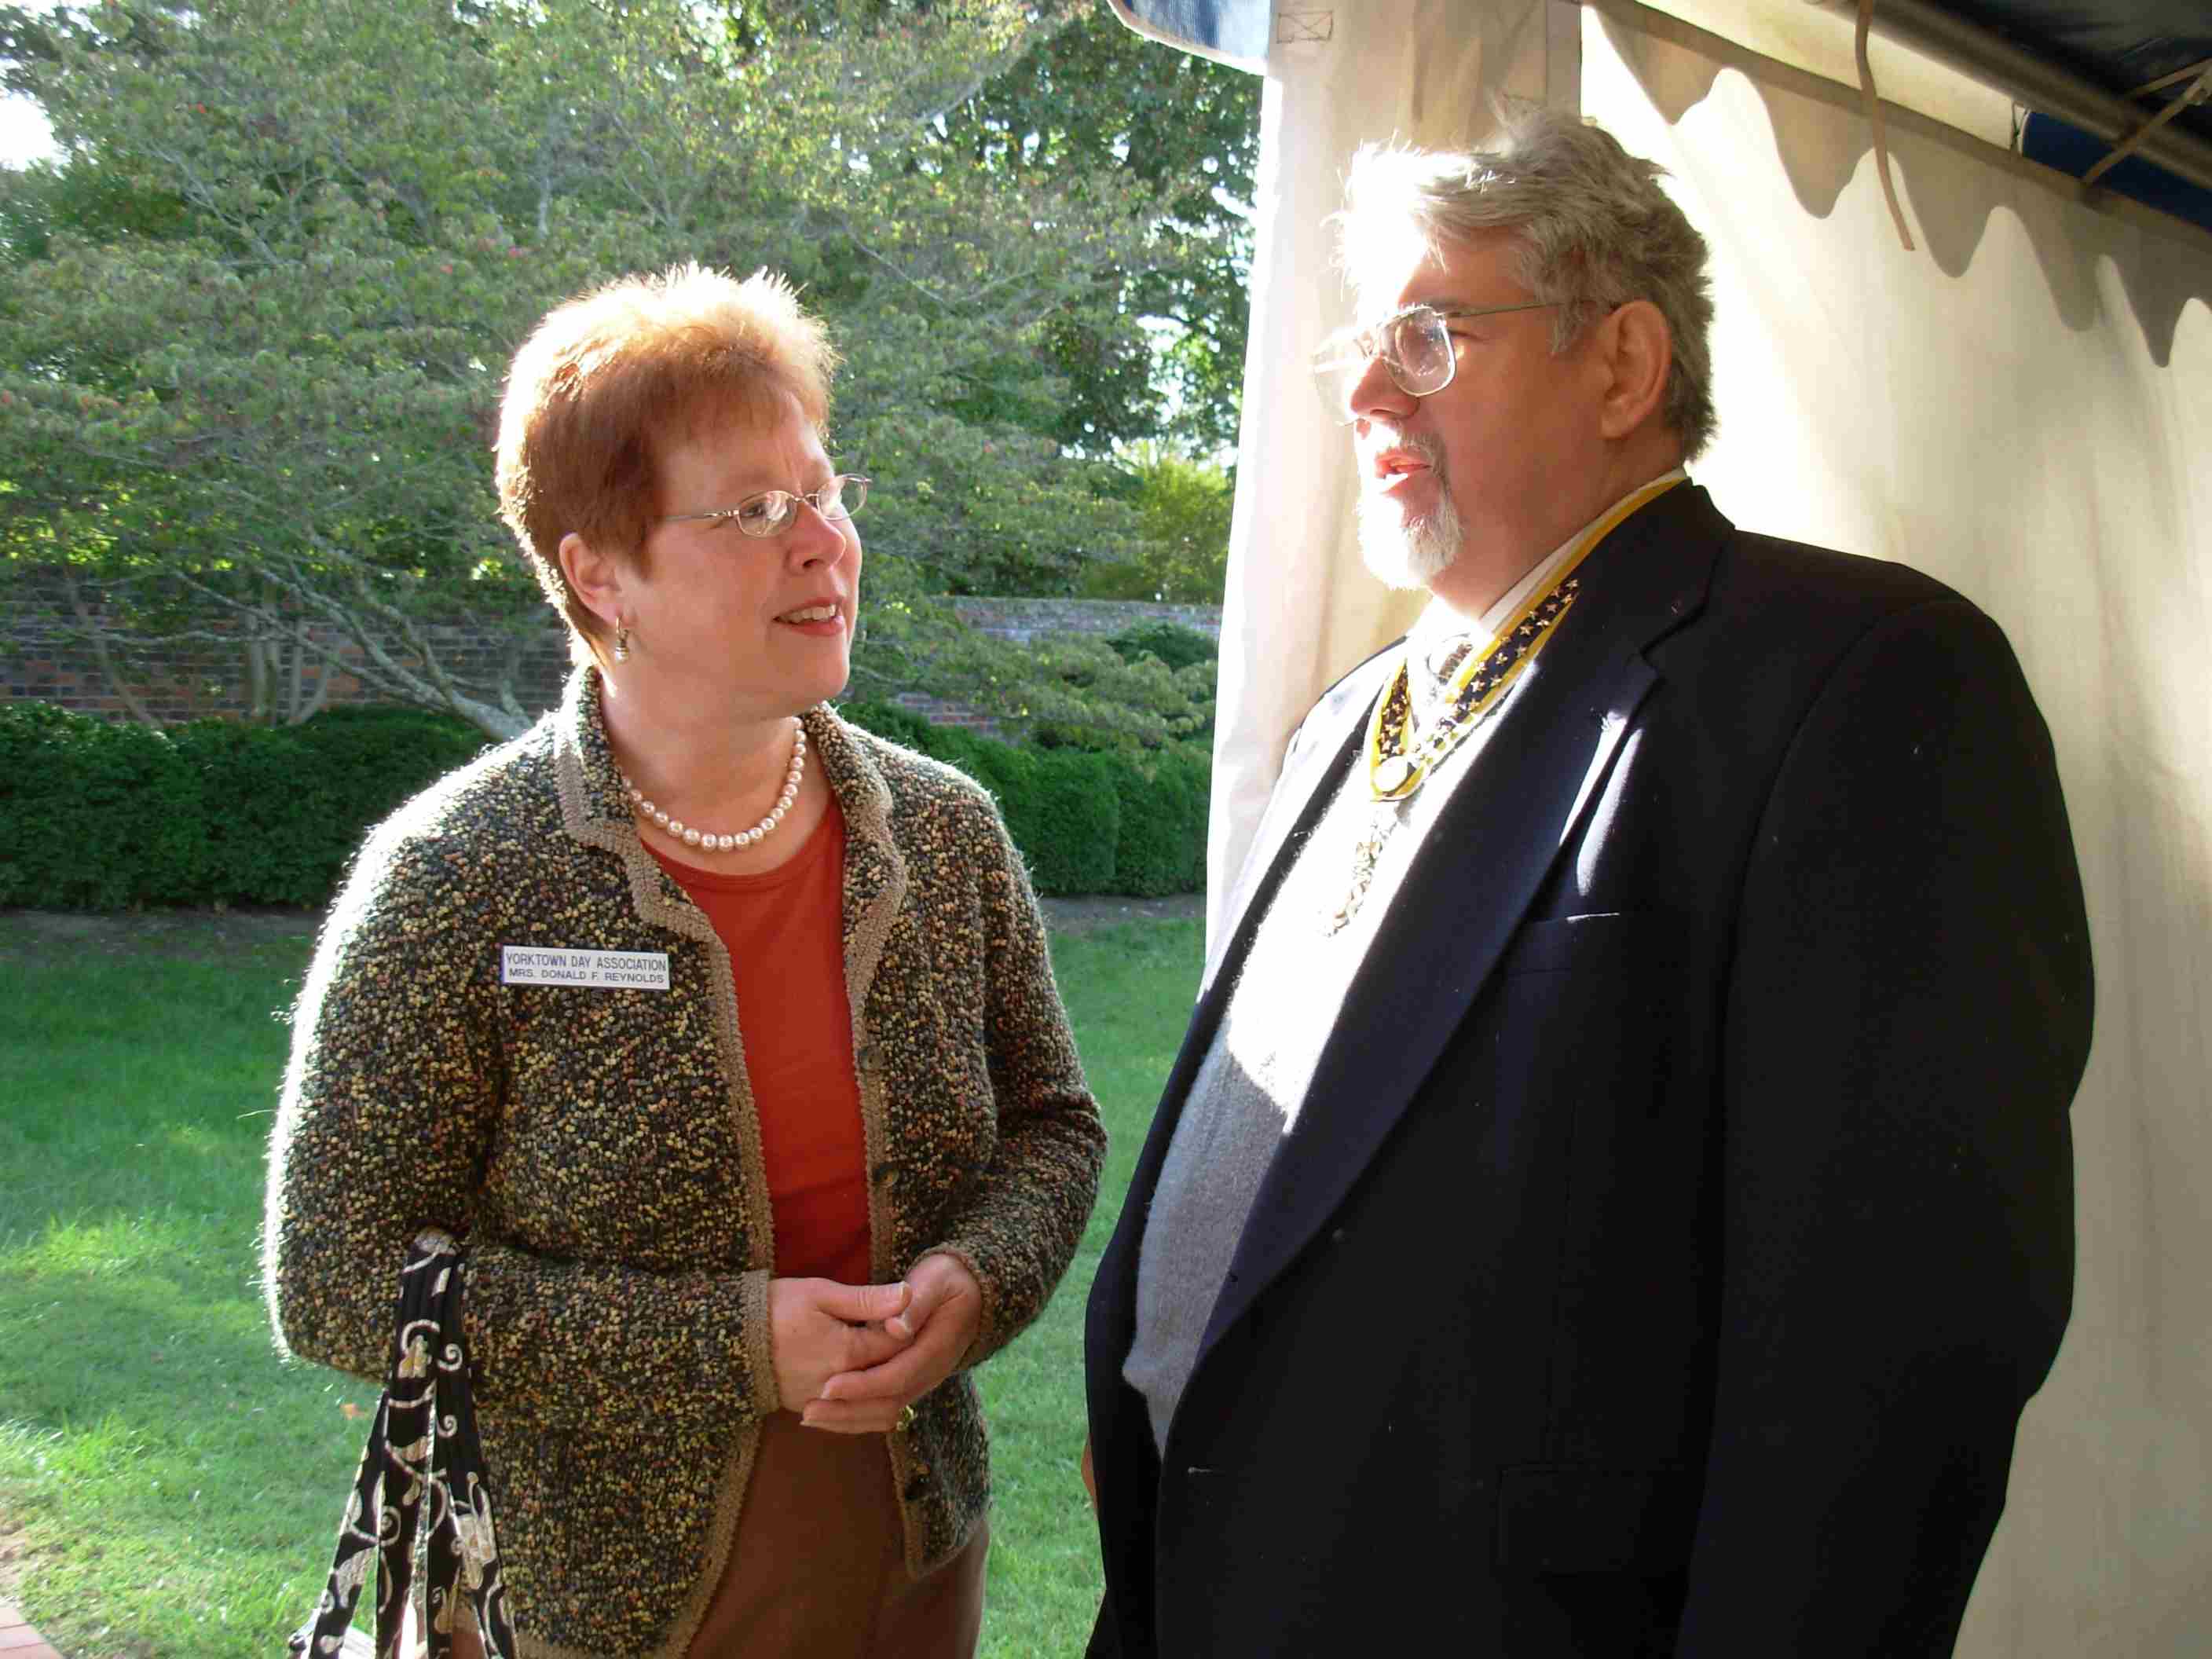 John Sinks and Suzanne Reynolds at the reception hosted by the Compte de Grasse Chapter DAR.